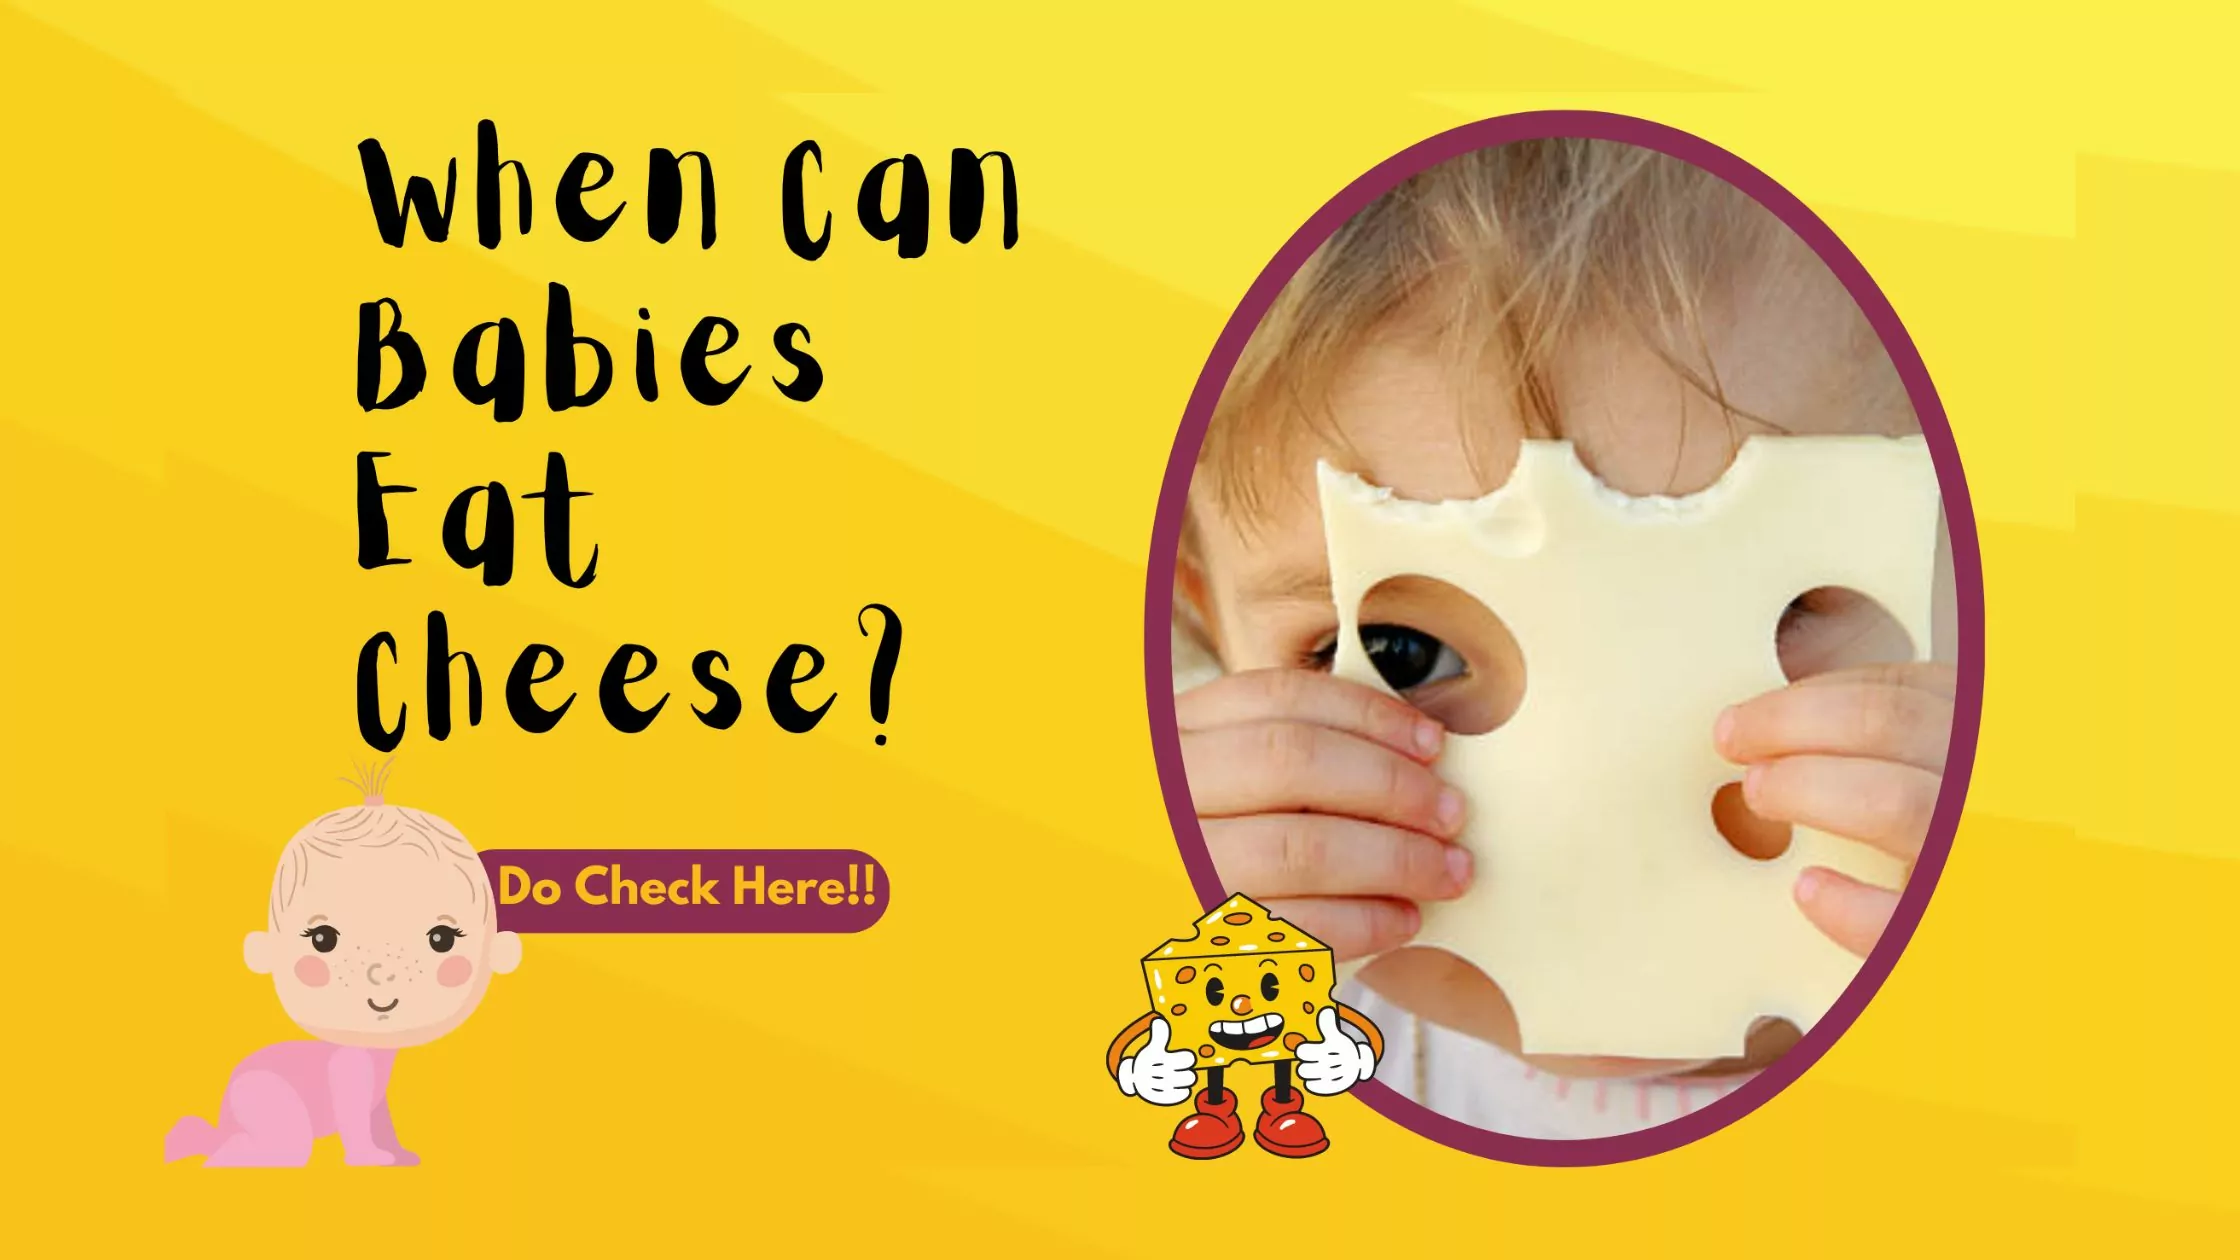 When Can Babies Eat Cheese